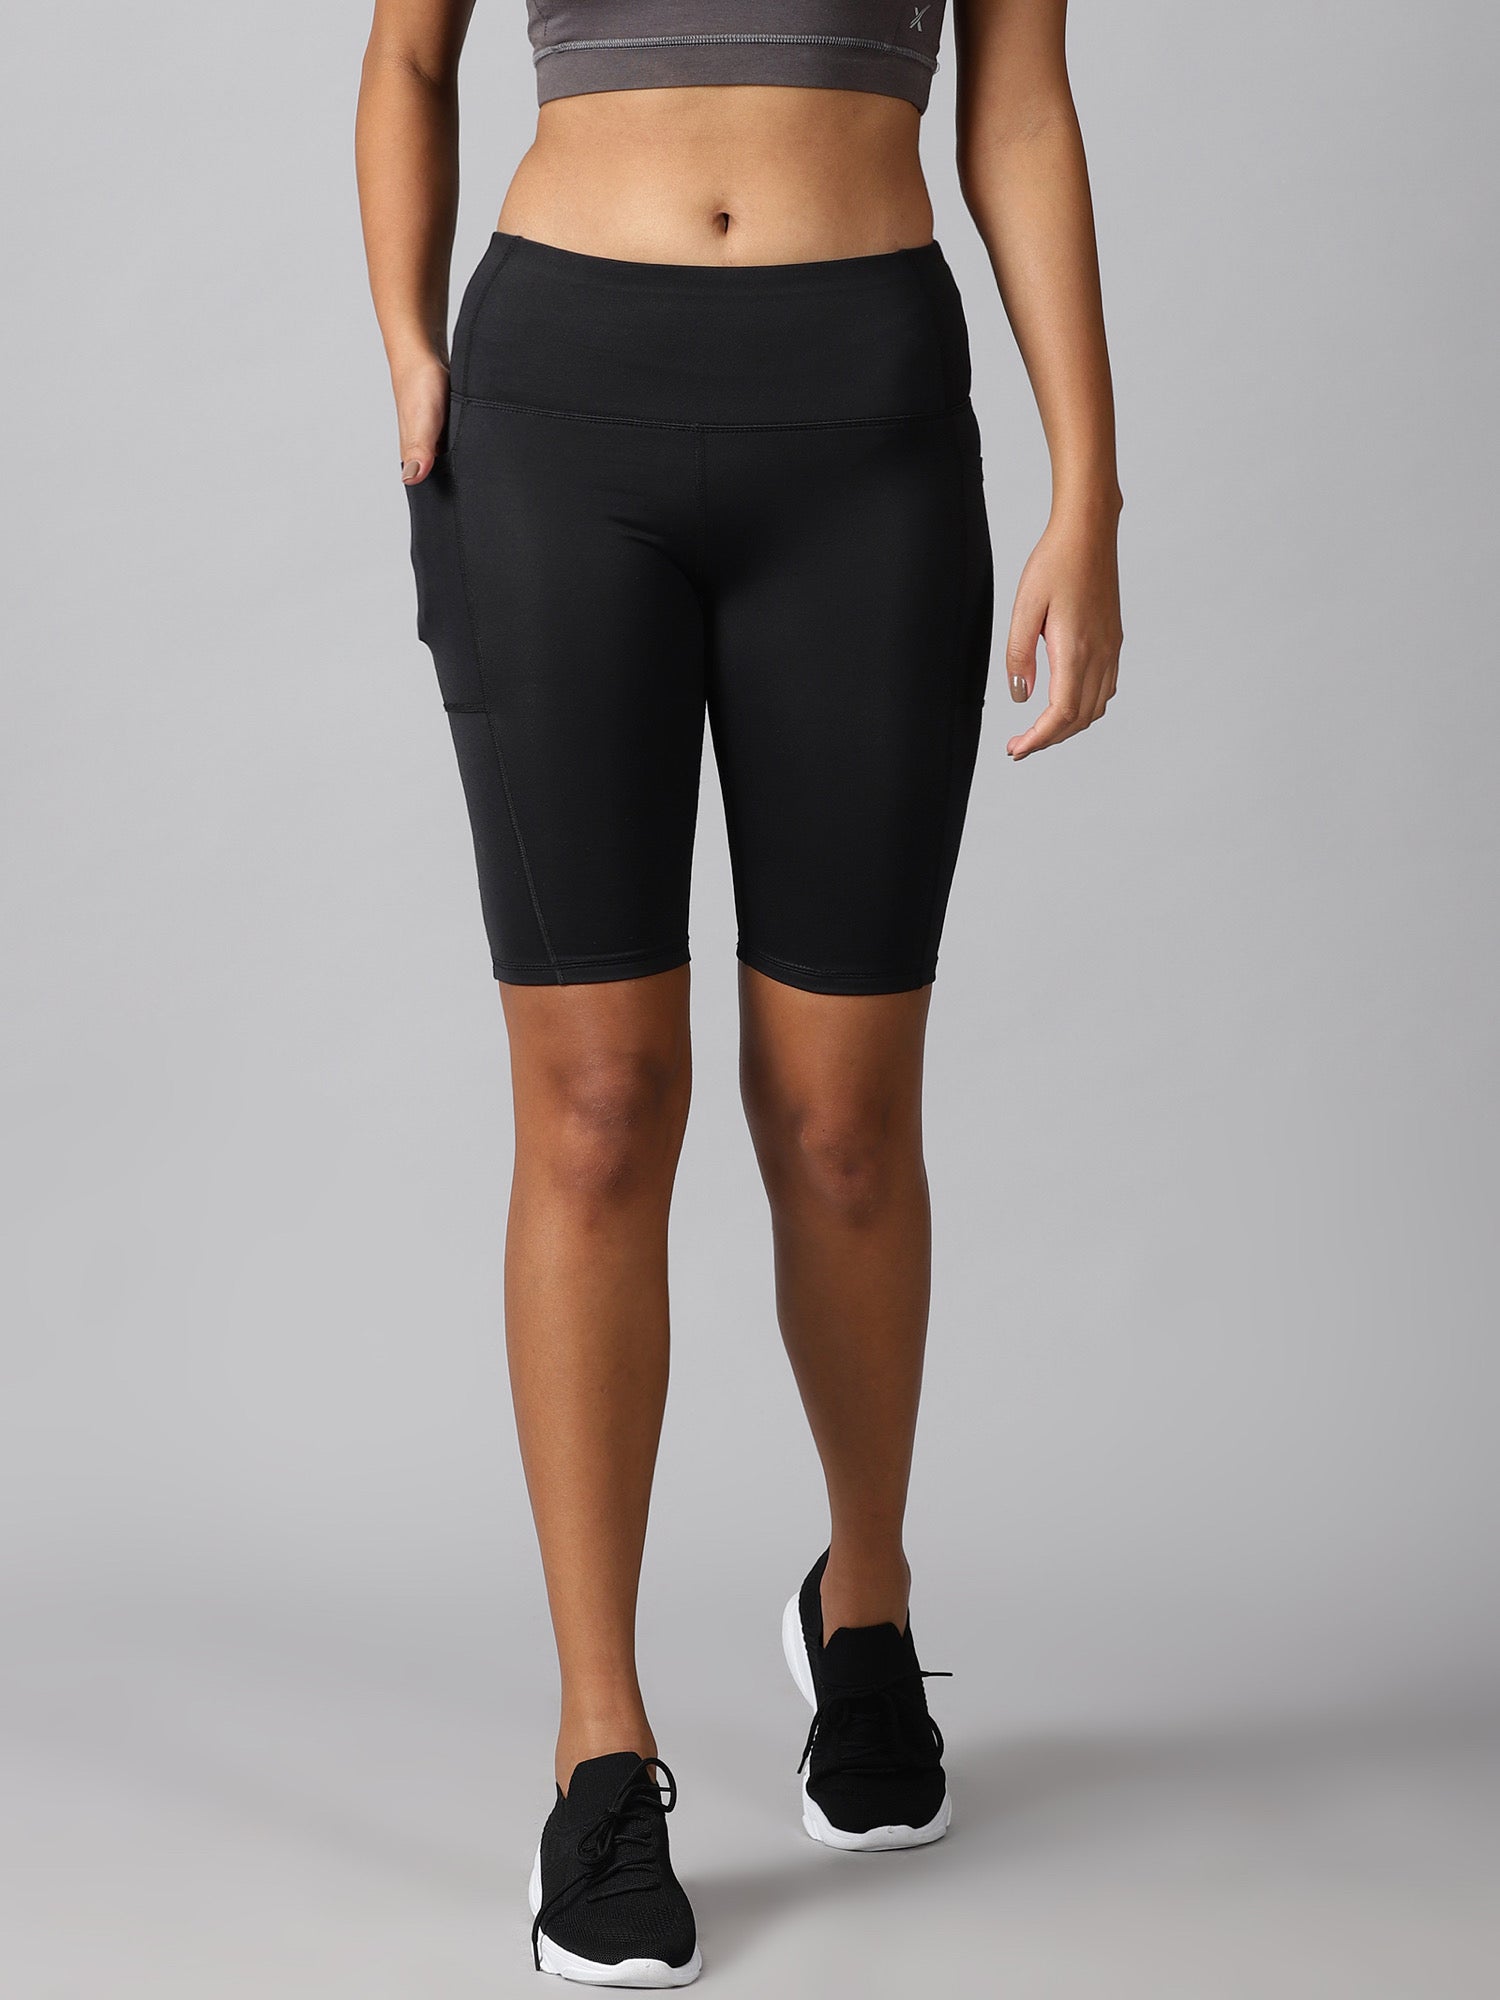 Black cycling shorts with side pockets